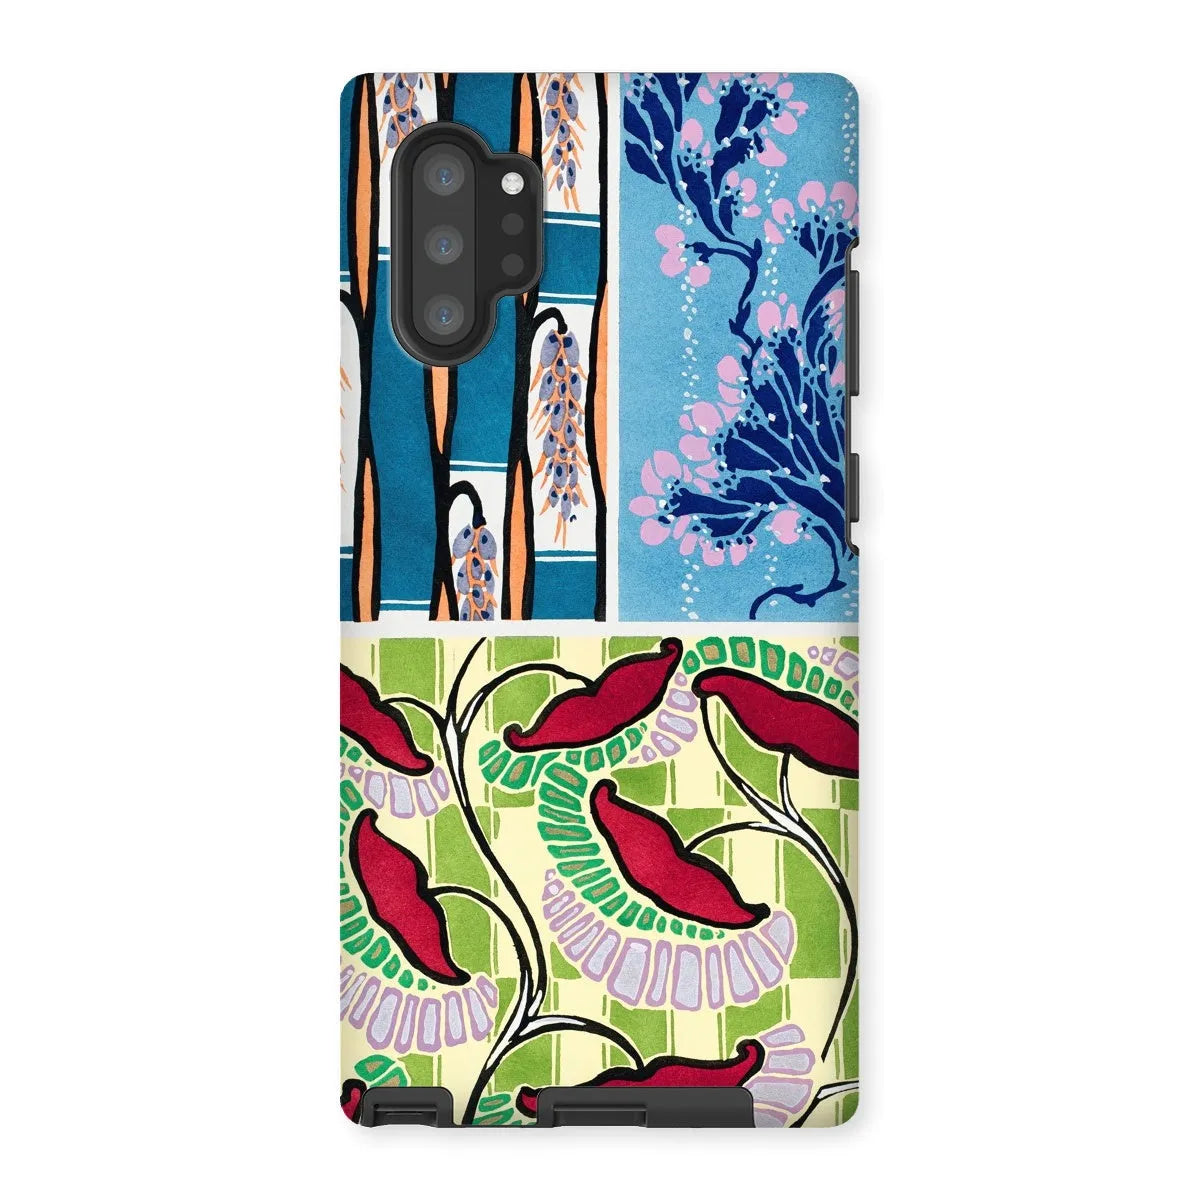 Floral Kitsch Aesthetic Art Phone Case - E.a. Séguy - Samsung Galaxy Note 10p / Matte - Mobile Phone Cases